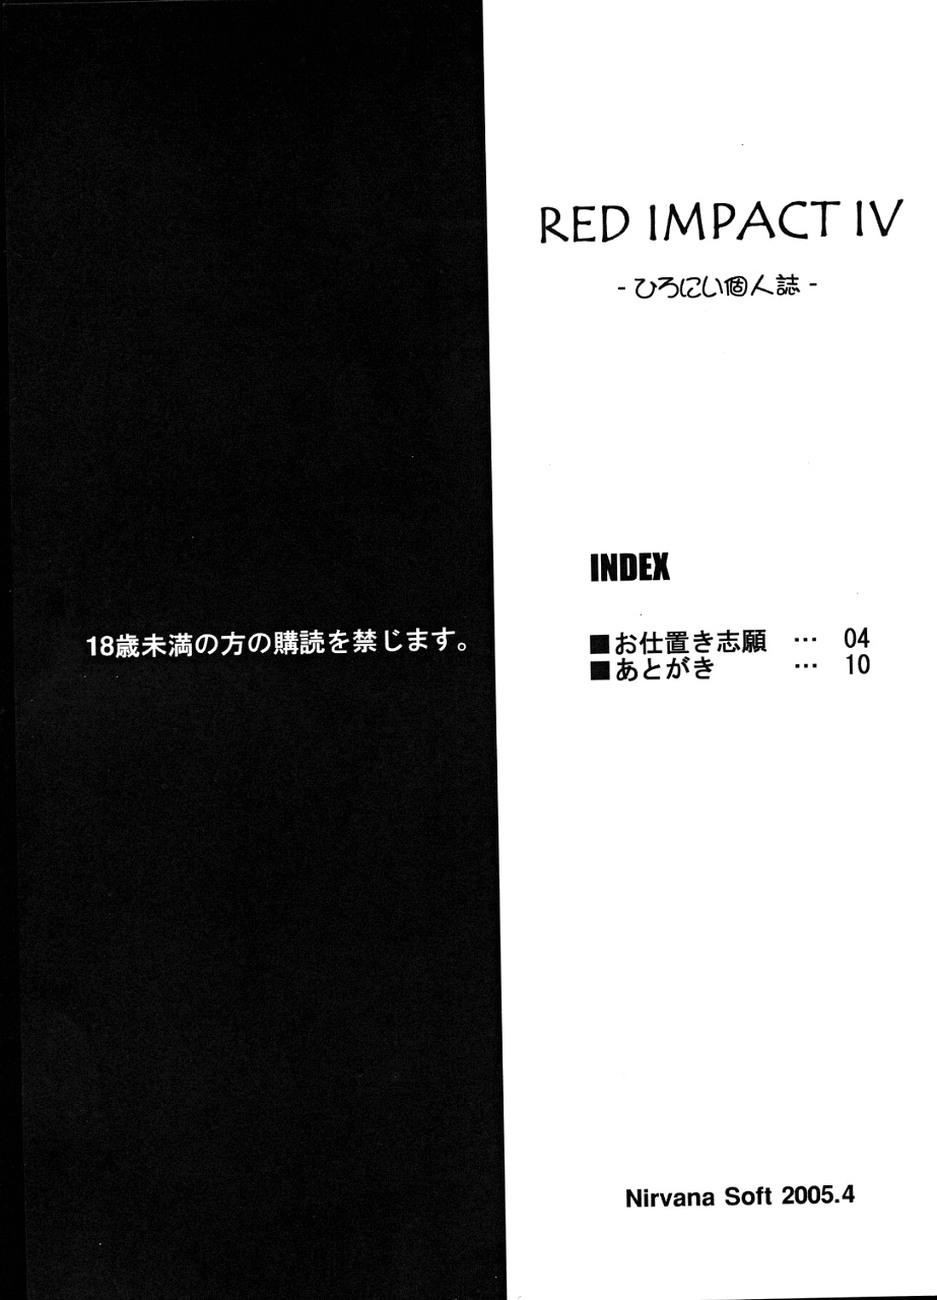 Red Impact IV 2